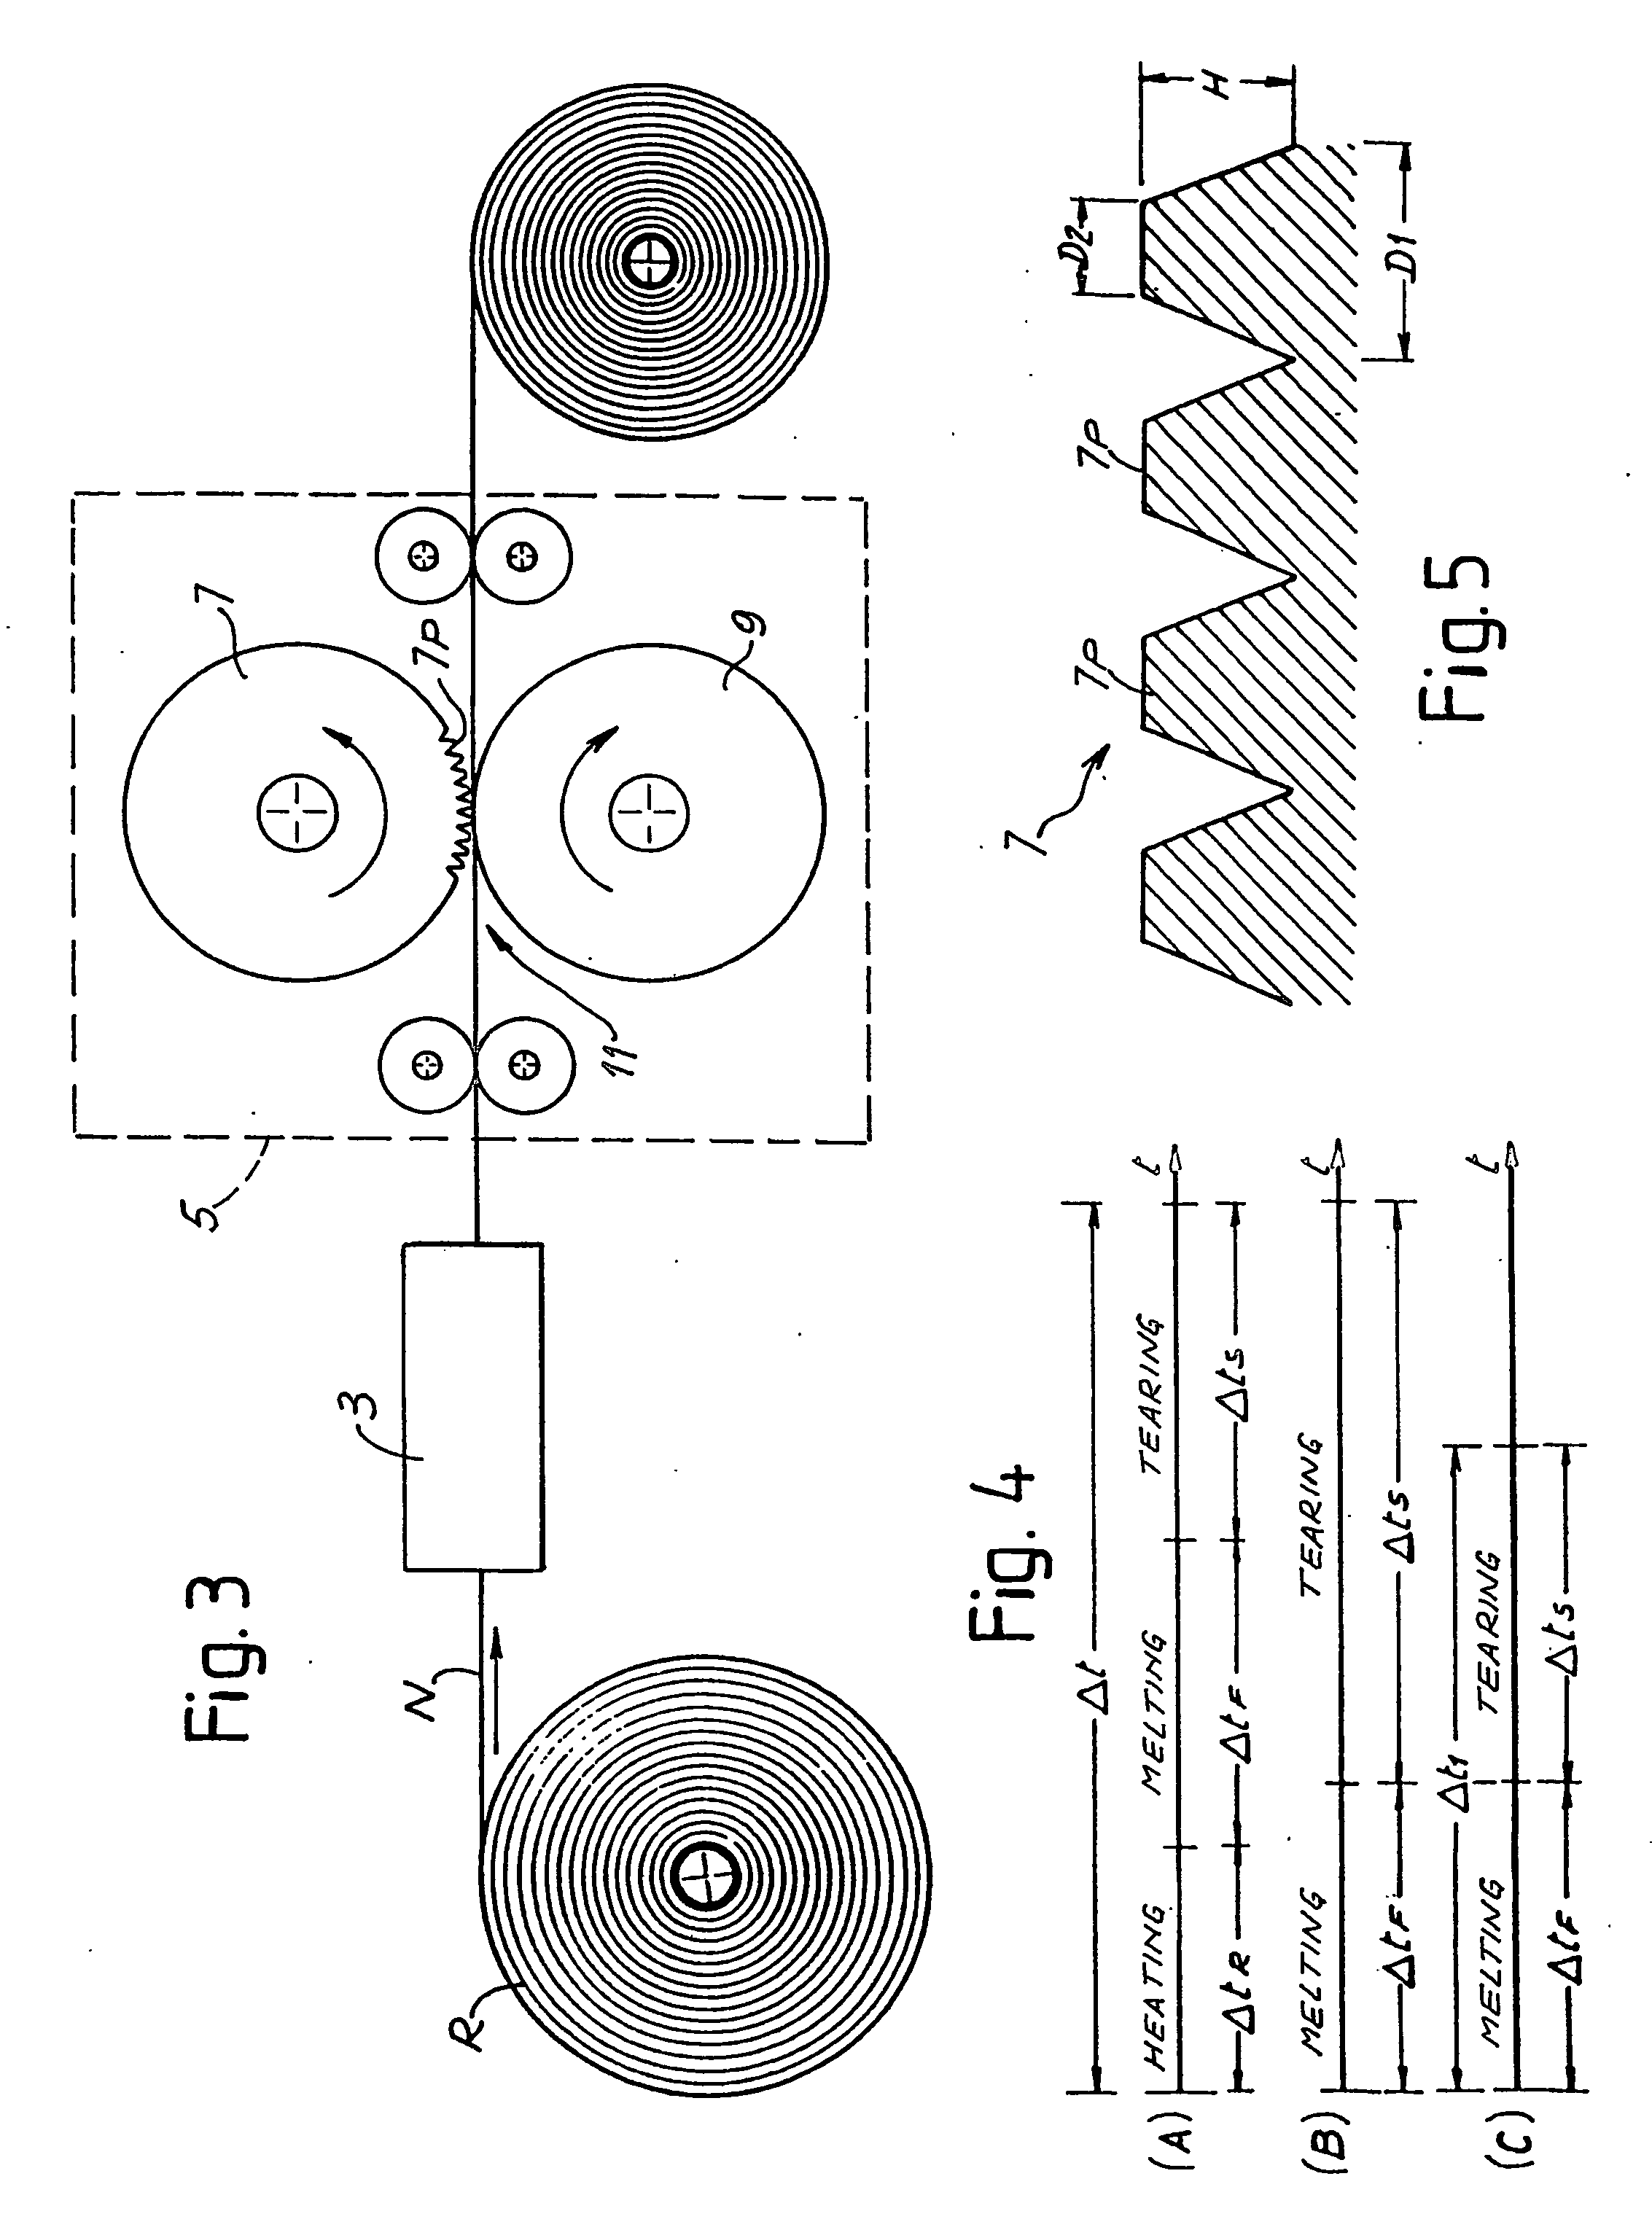 Method and device to produce a perforated web material